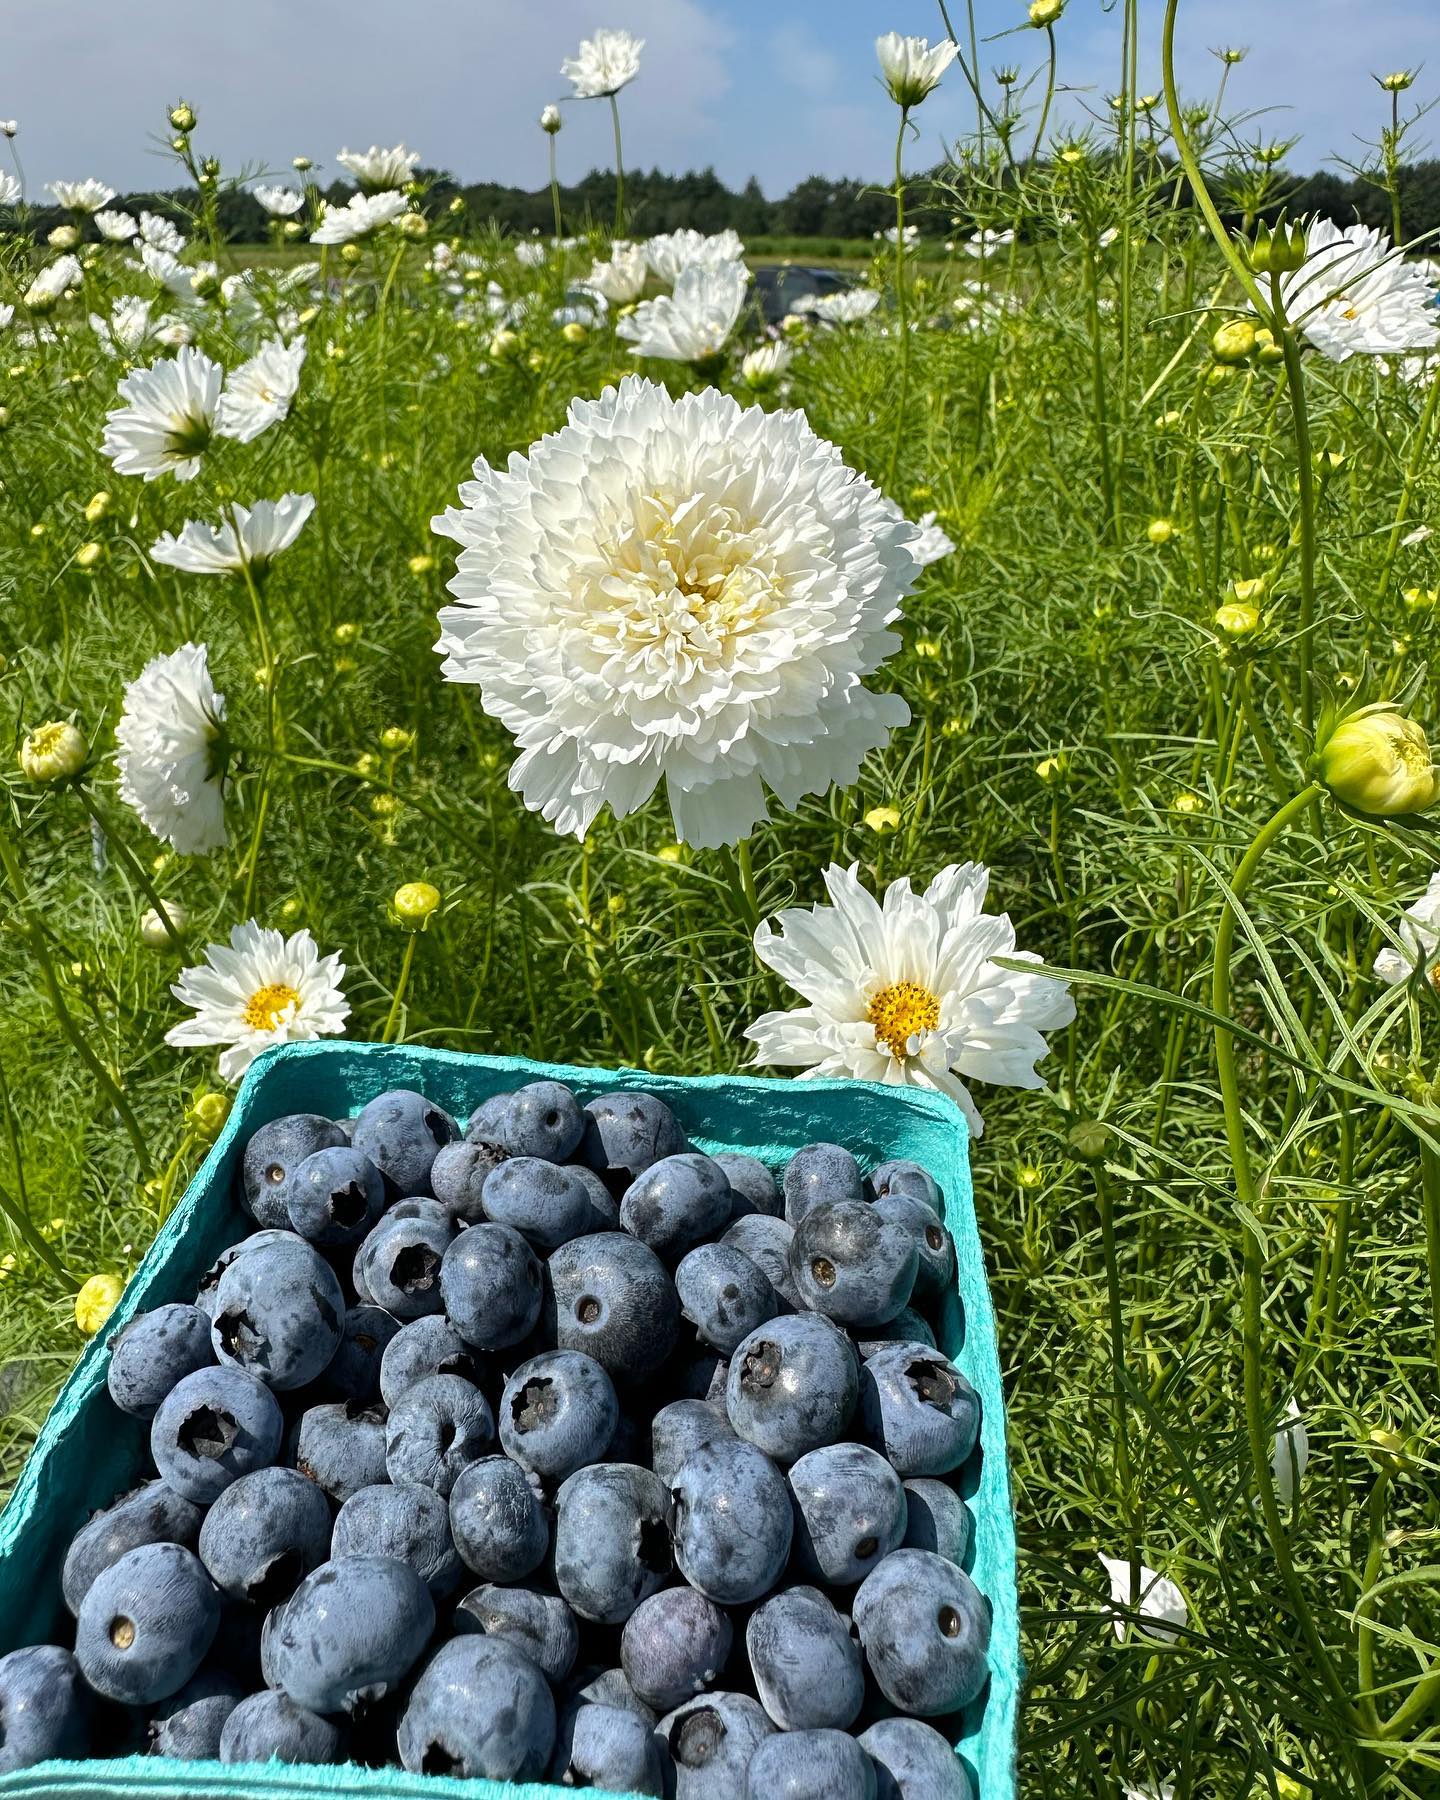 Pick Your Own berries and flowers is open at Pineland Farms in New Glocester, Maine